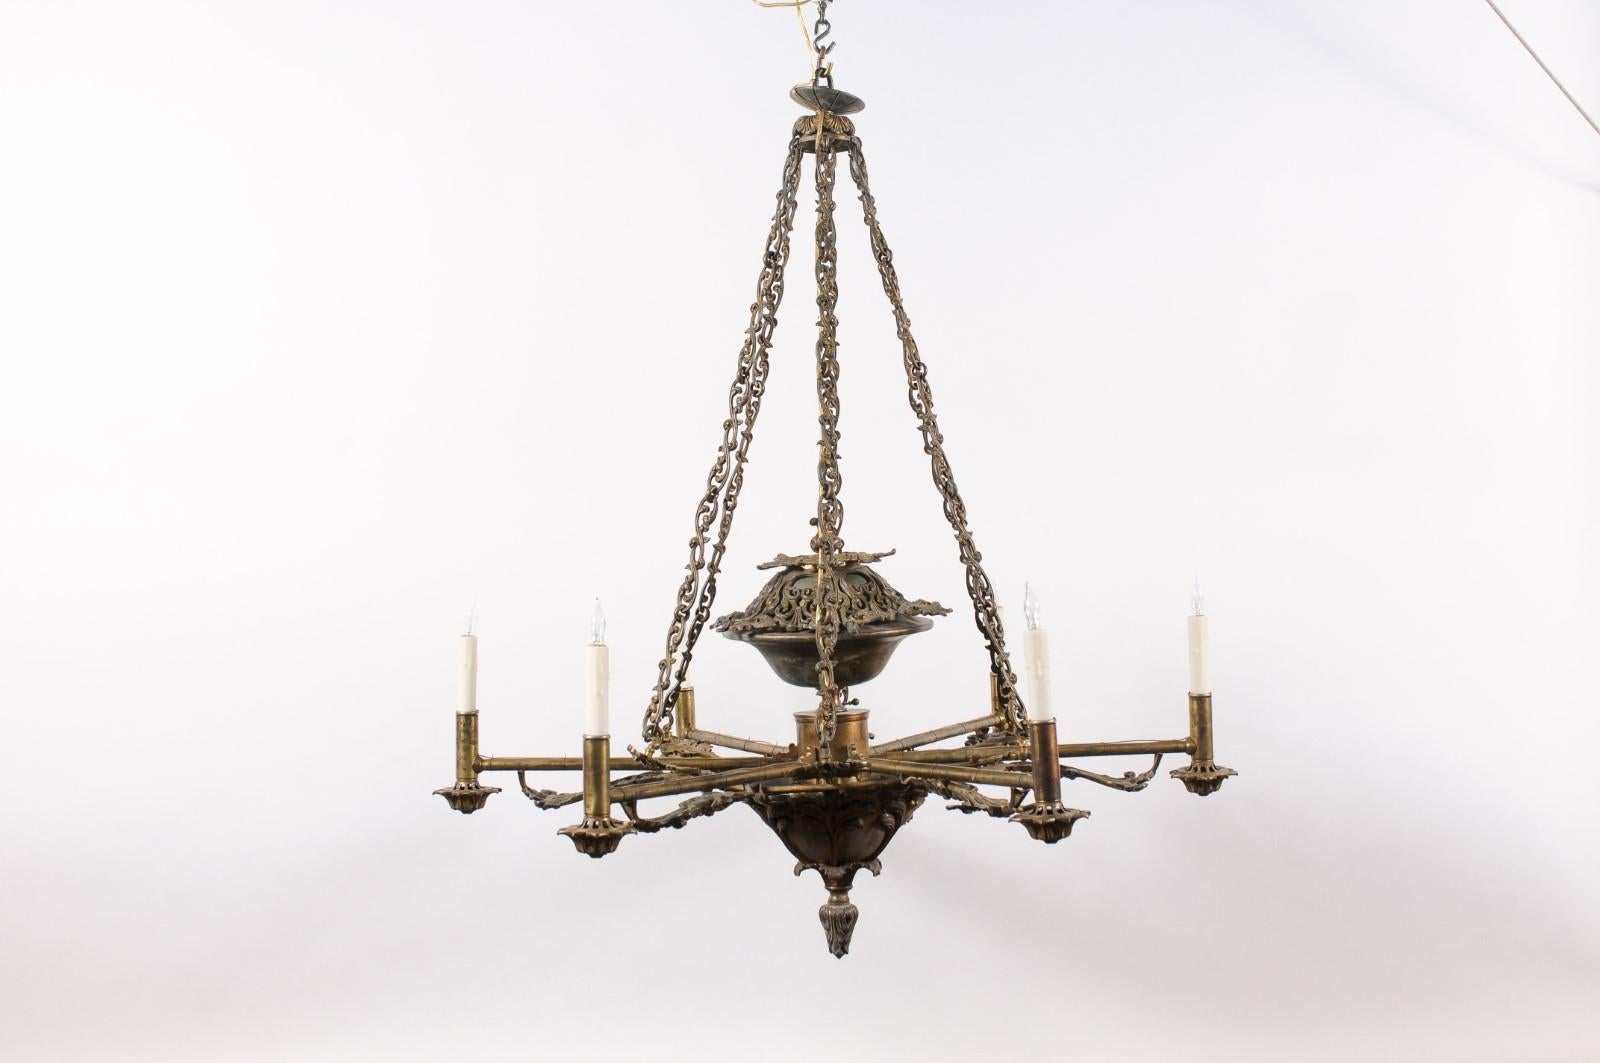  Italian Mid 19th Century Bronze Chandelier with Foliage Detail and 6 Lites For Sale 8